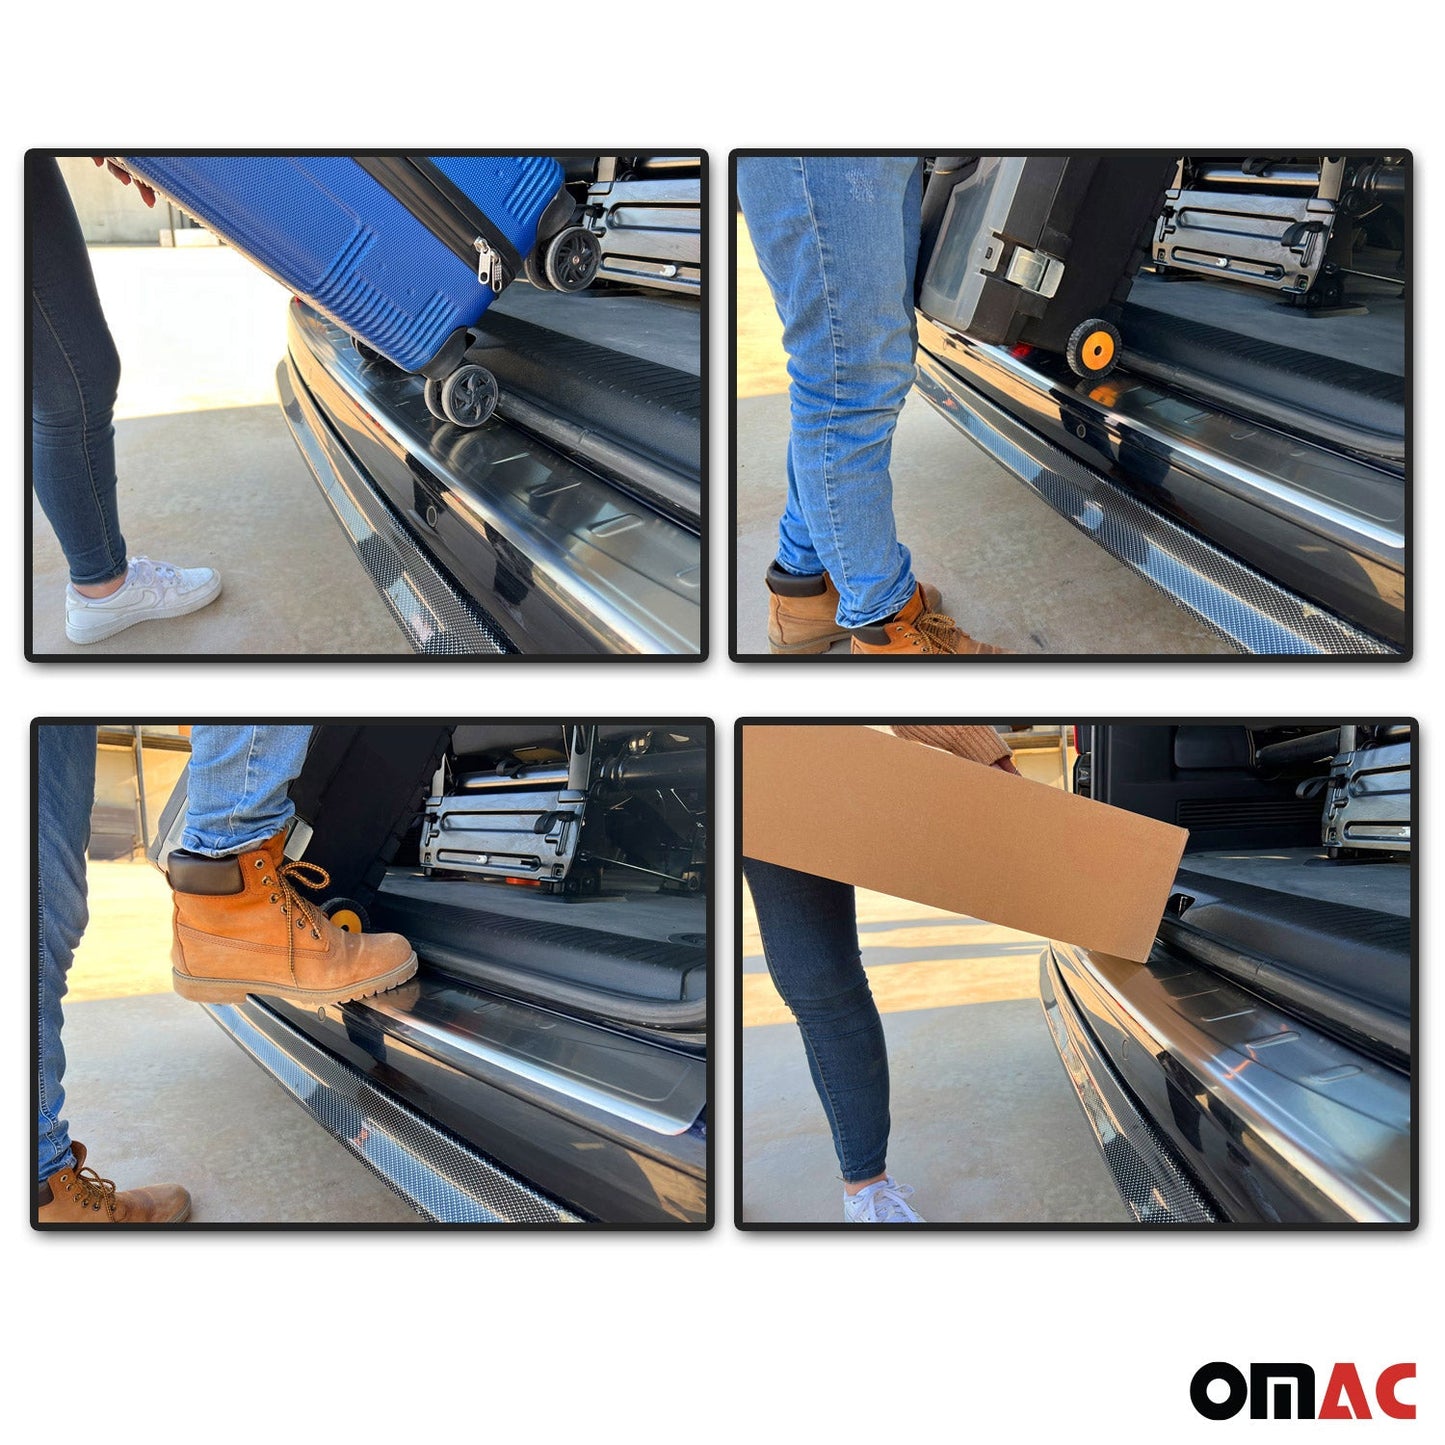 OMAC Rear Bumper Sill Cover Protector Guard for Ford Escape 2013-2019 Brushed Steel 2616093T